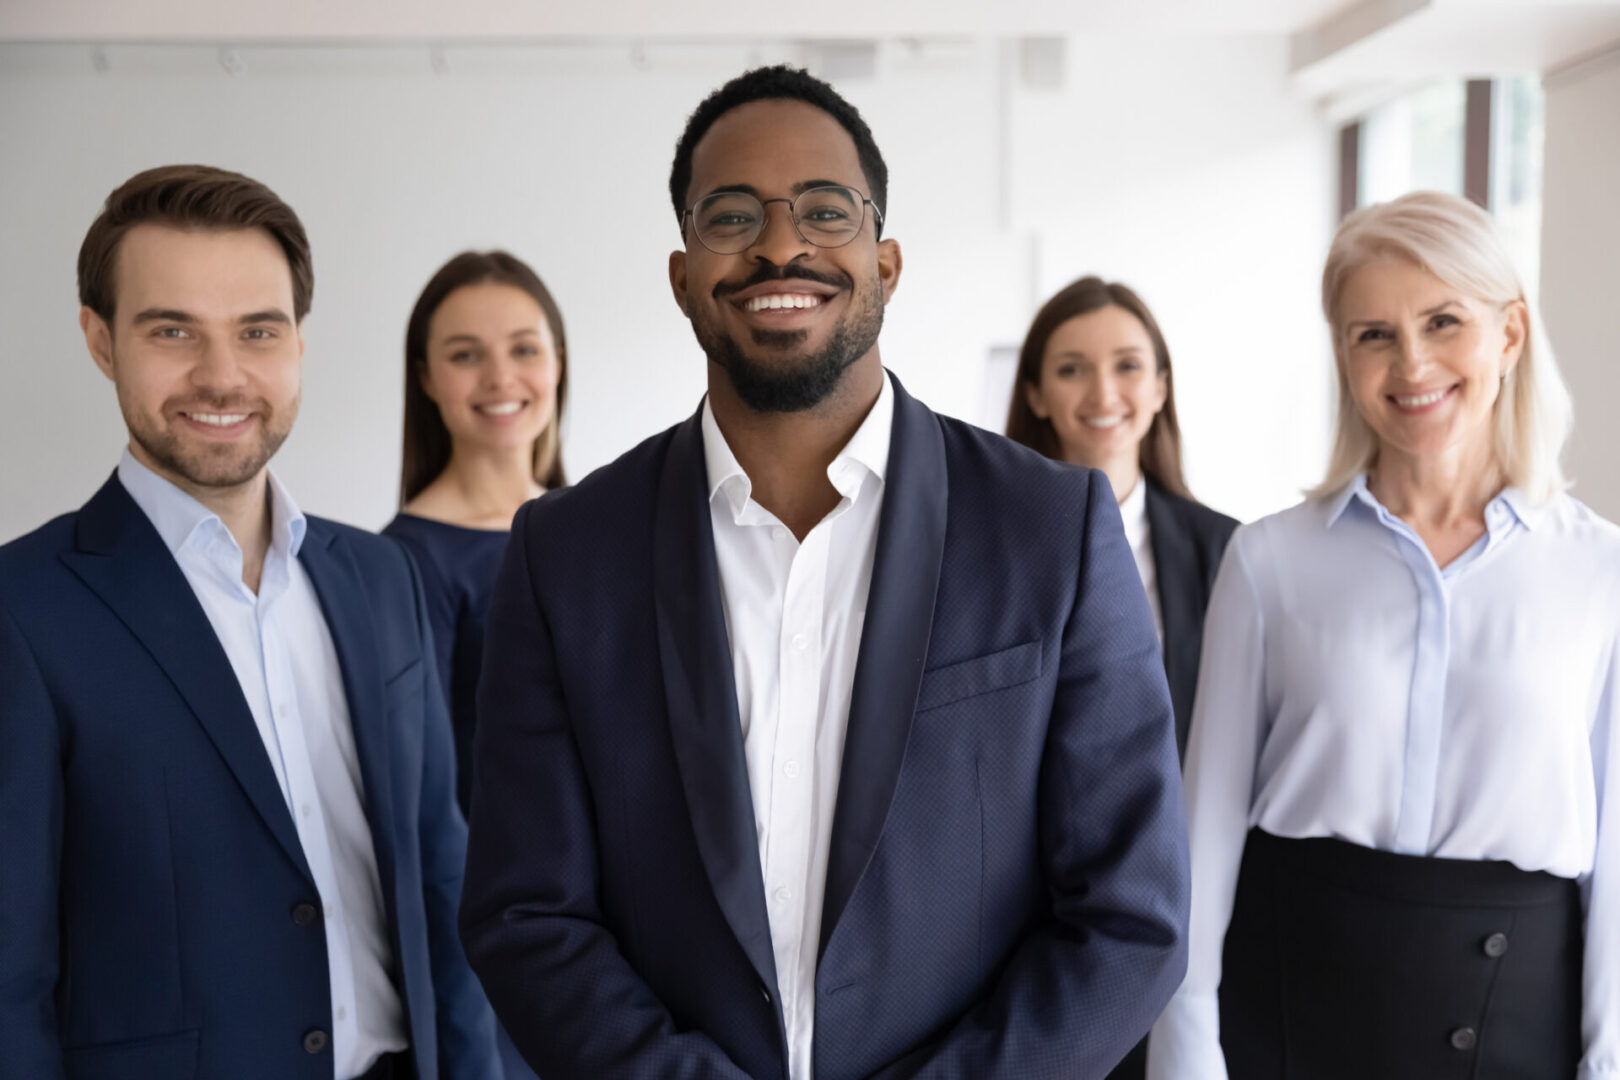 Diverse professionals bank employees company staff members in formal wear, 5 businesspeople lead by African ethnicity leader posing standing together in office. Young aged specialists portrait concept